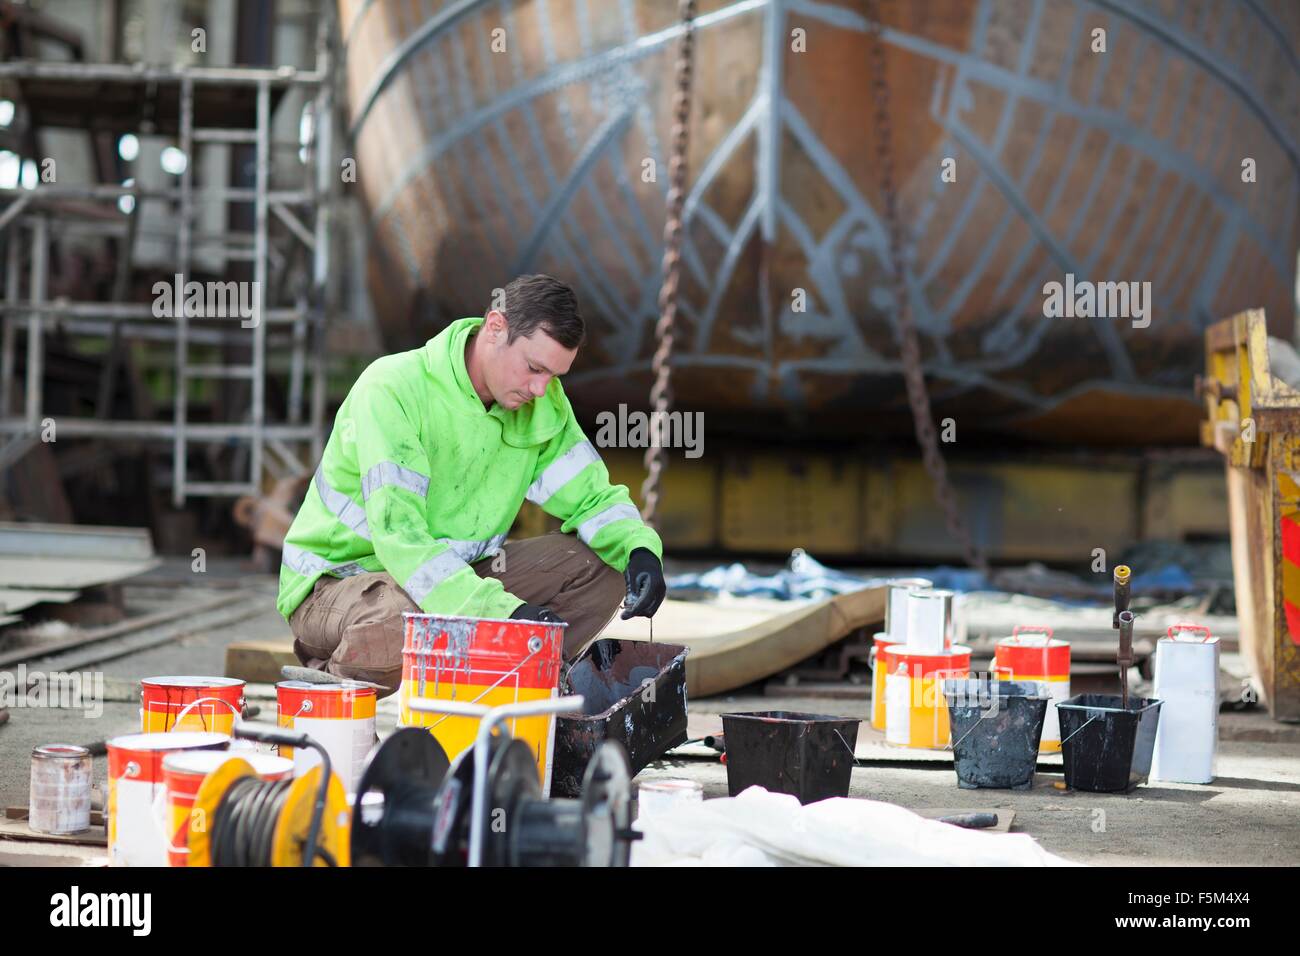 Worker mixing boat paints in shipyard Stock Photo